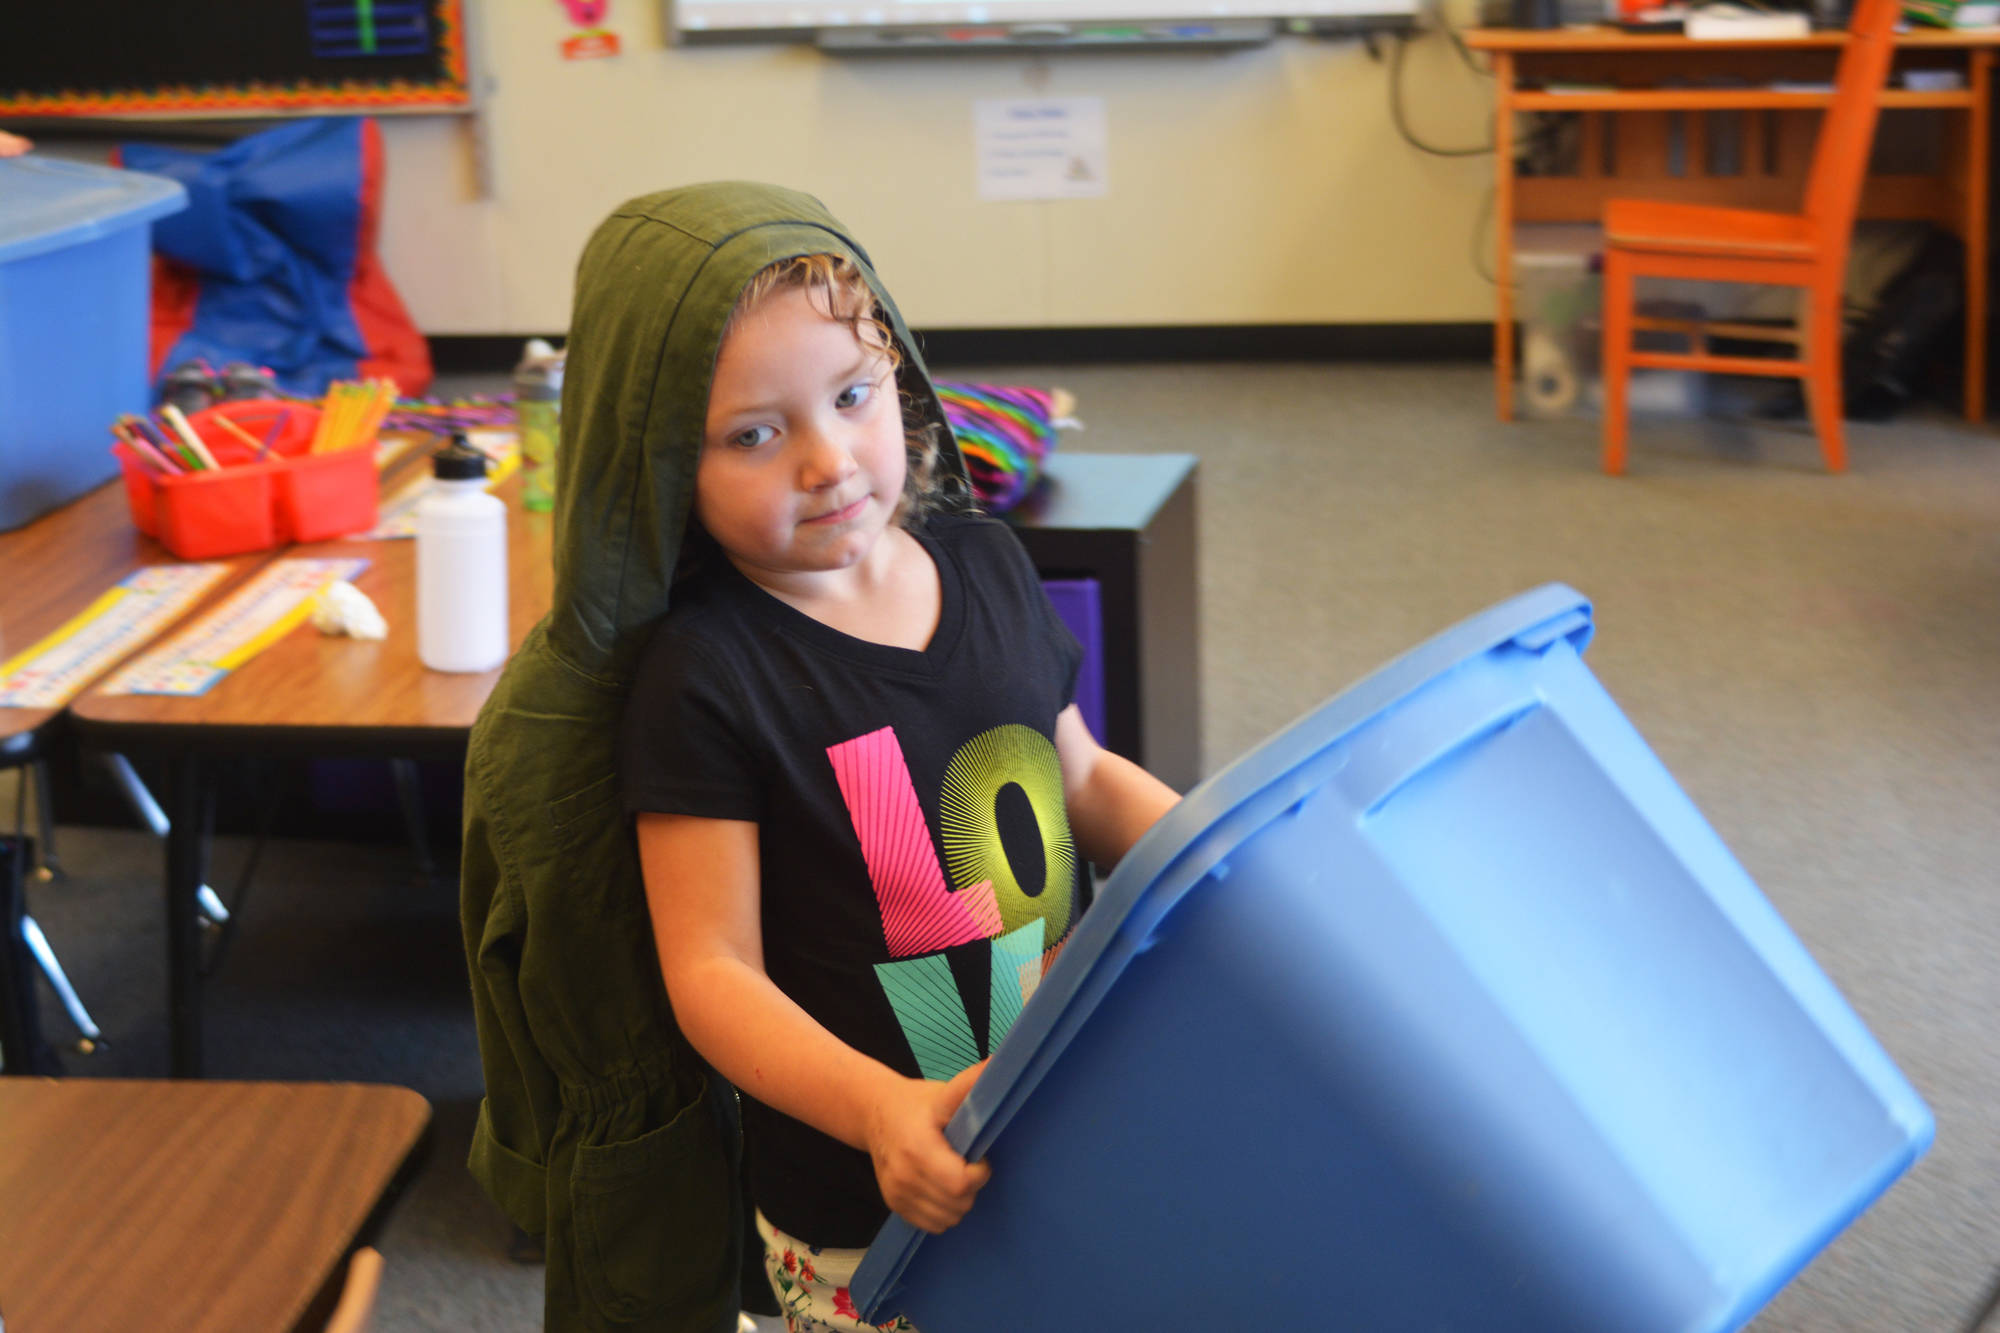 Olivia Pitzman, a kindergartener, carries her tub of outside clothes to a desk as she prepares to head outdoors for recess on the first day of the school year Tuesday, Aug. 22, 2017 at Paul Banks Elementary in Homer, Alaska. (Photo by Megan Pacer/Homer News)